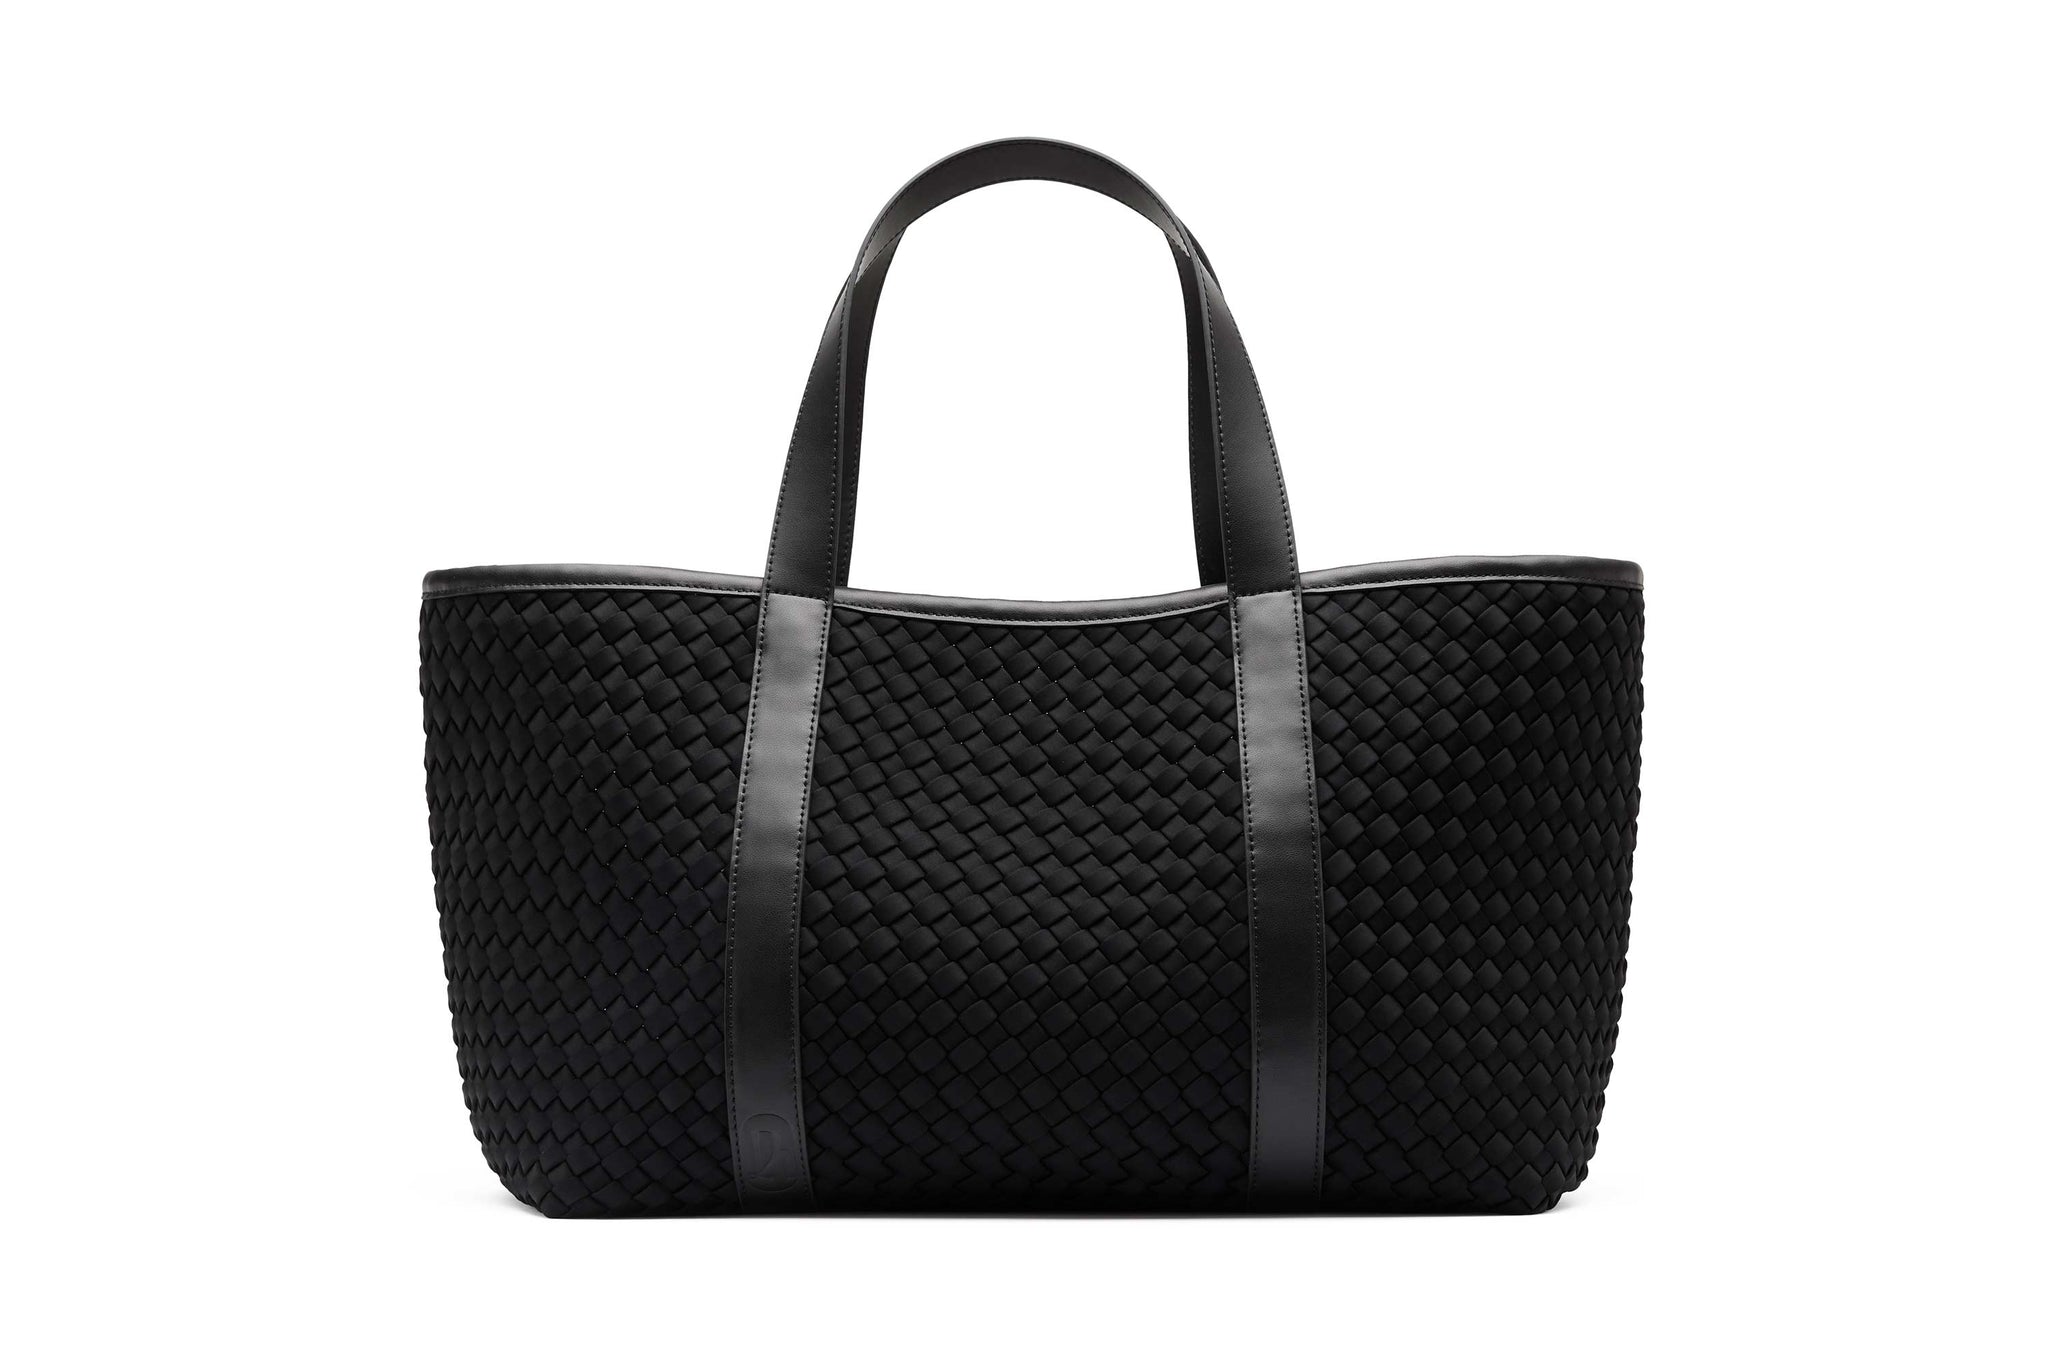 18.56 Rylan Uni-sex Black Woven Neoprene with Leather Carry-All Tote